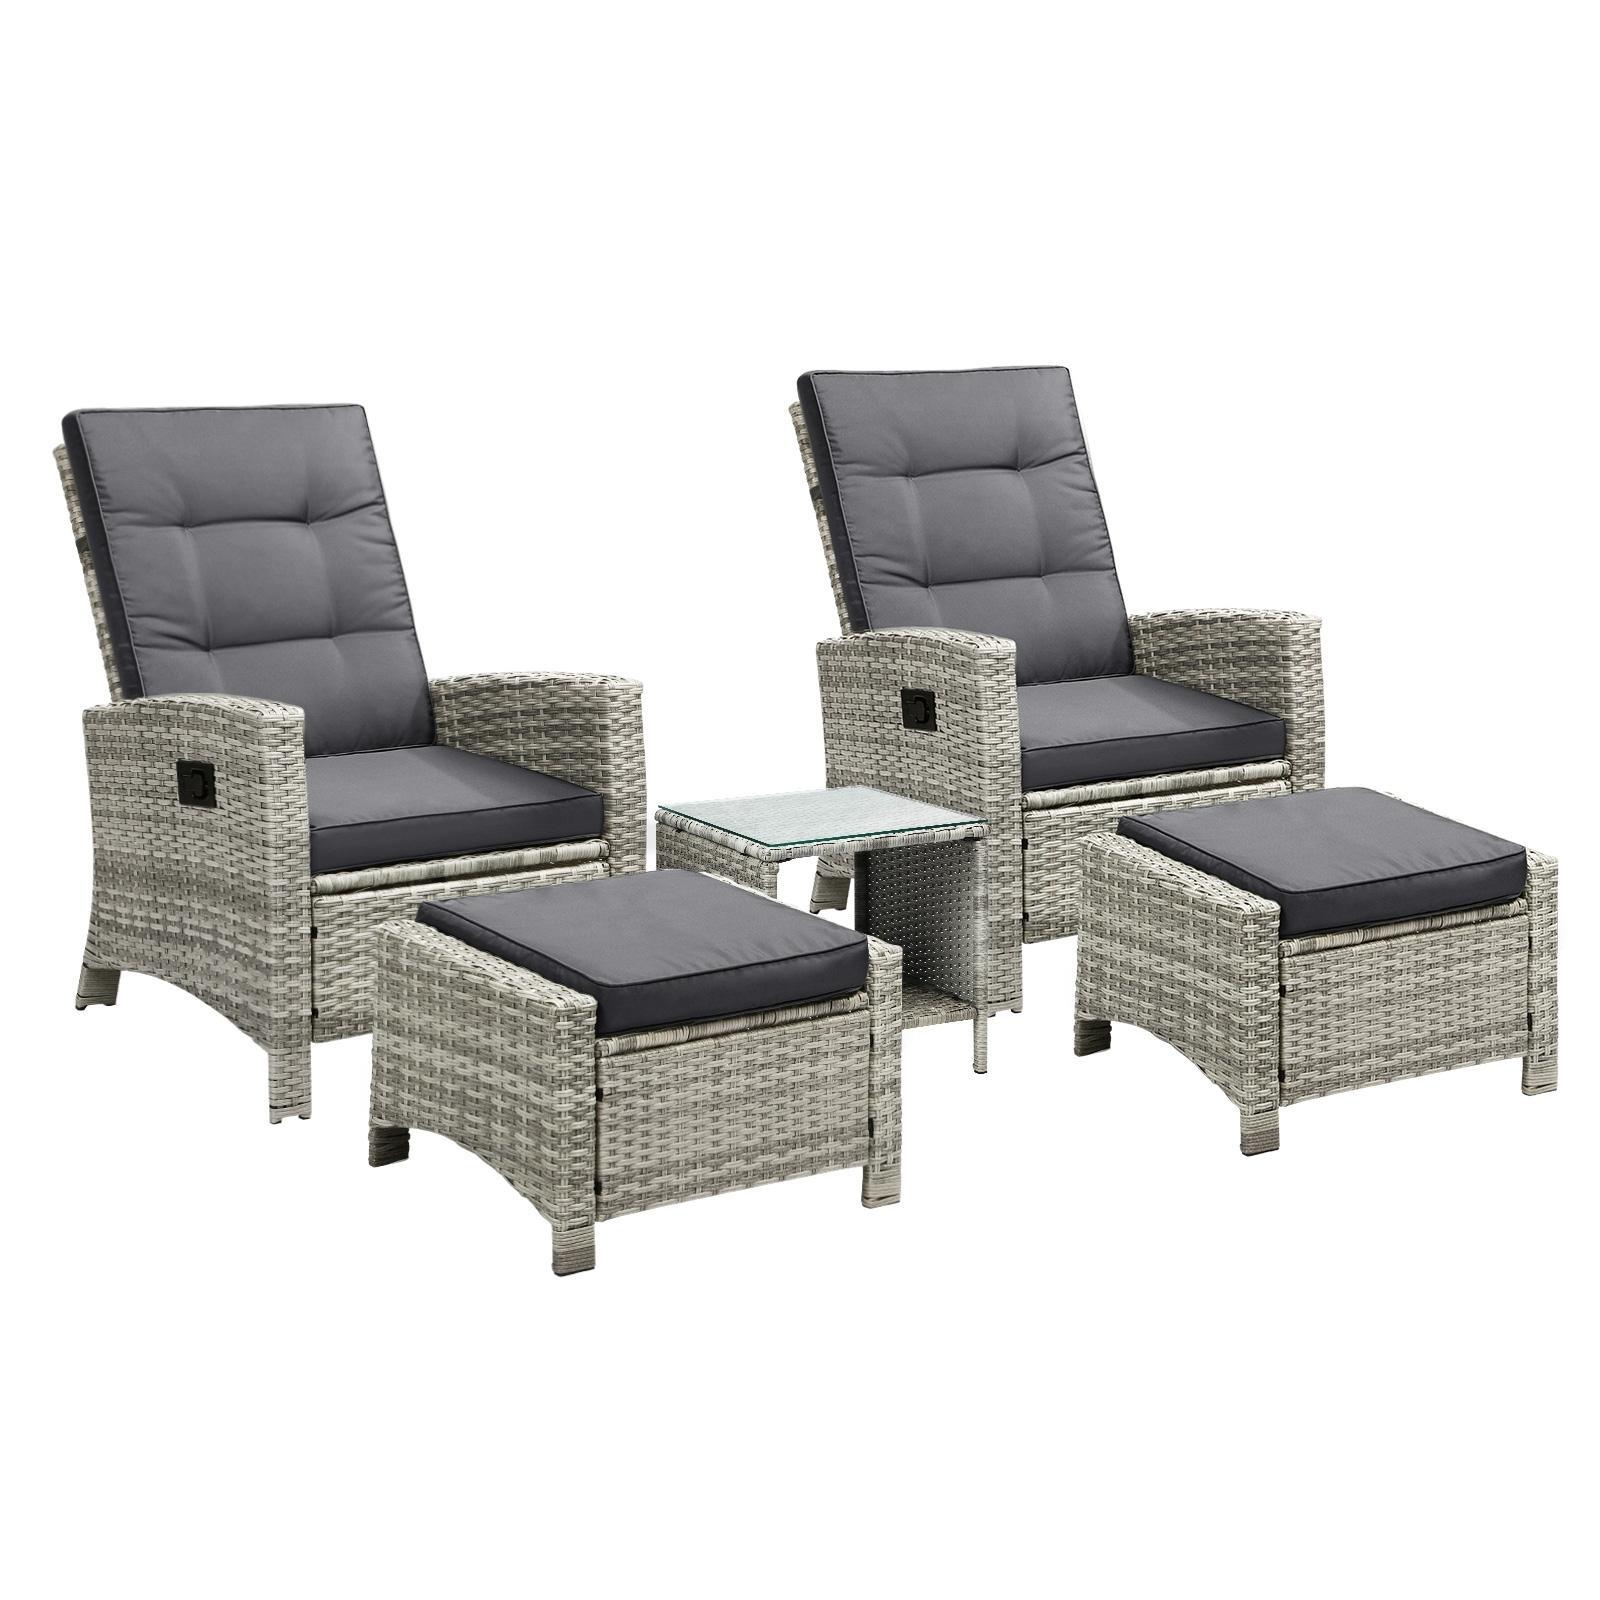 Livsip Outdoor Recliner Chairs & Table Set of 5 (Grey)